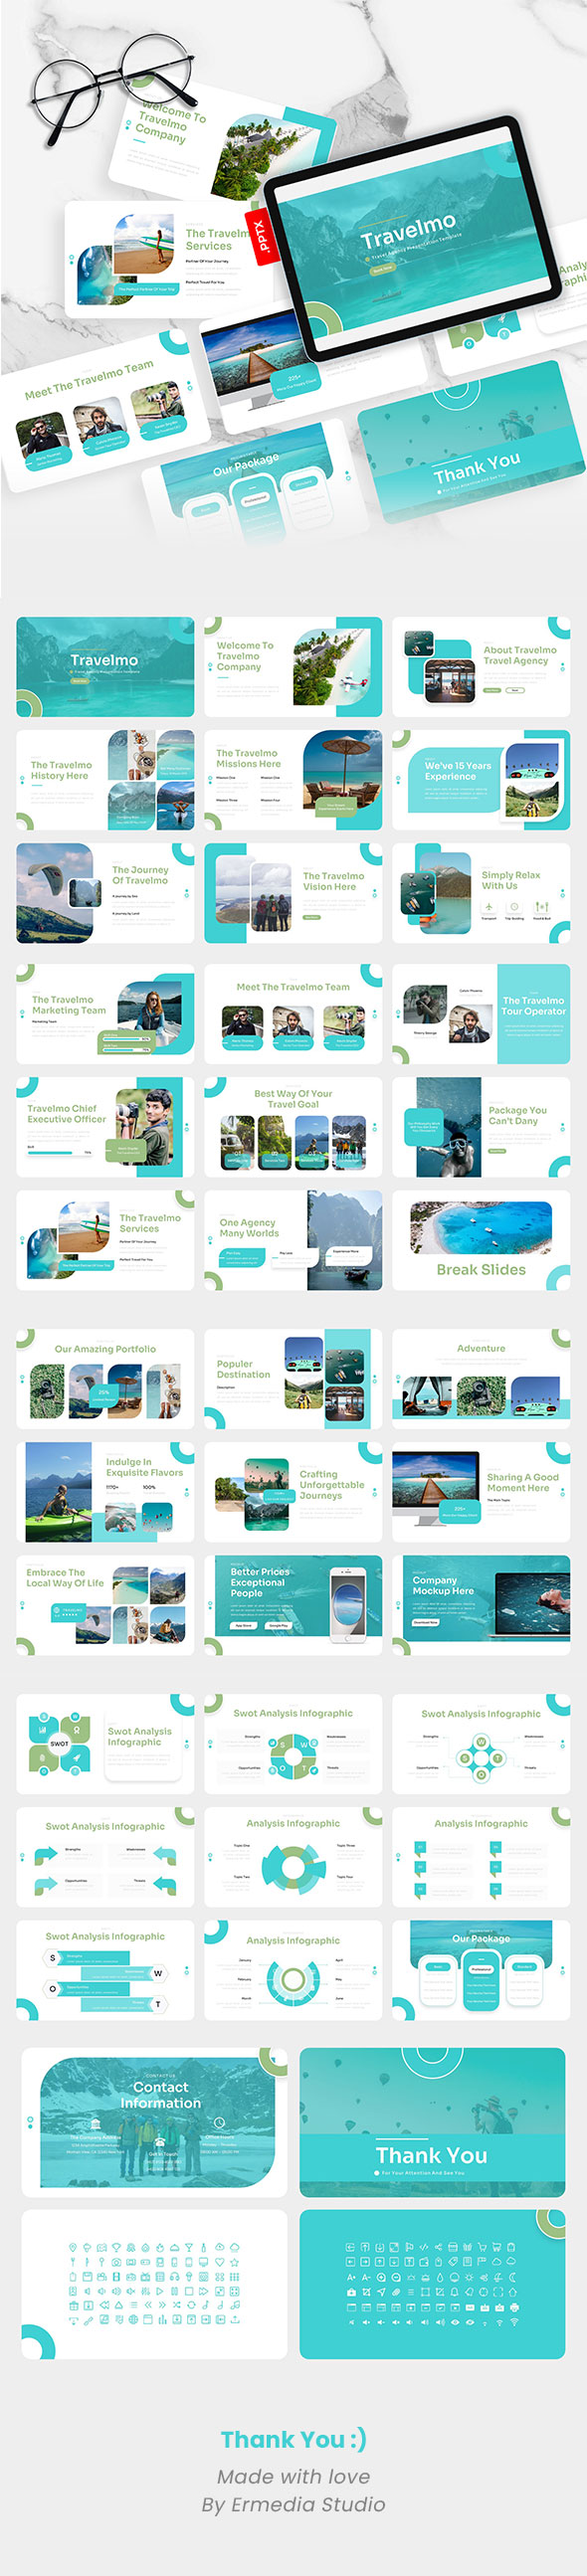 Travelmo – Travel Agency PowerPoint Template